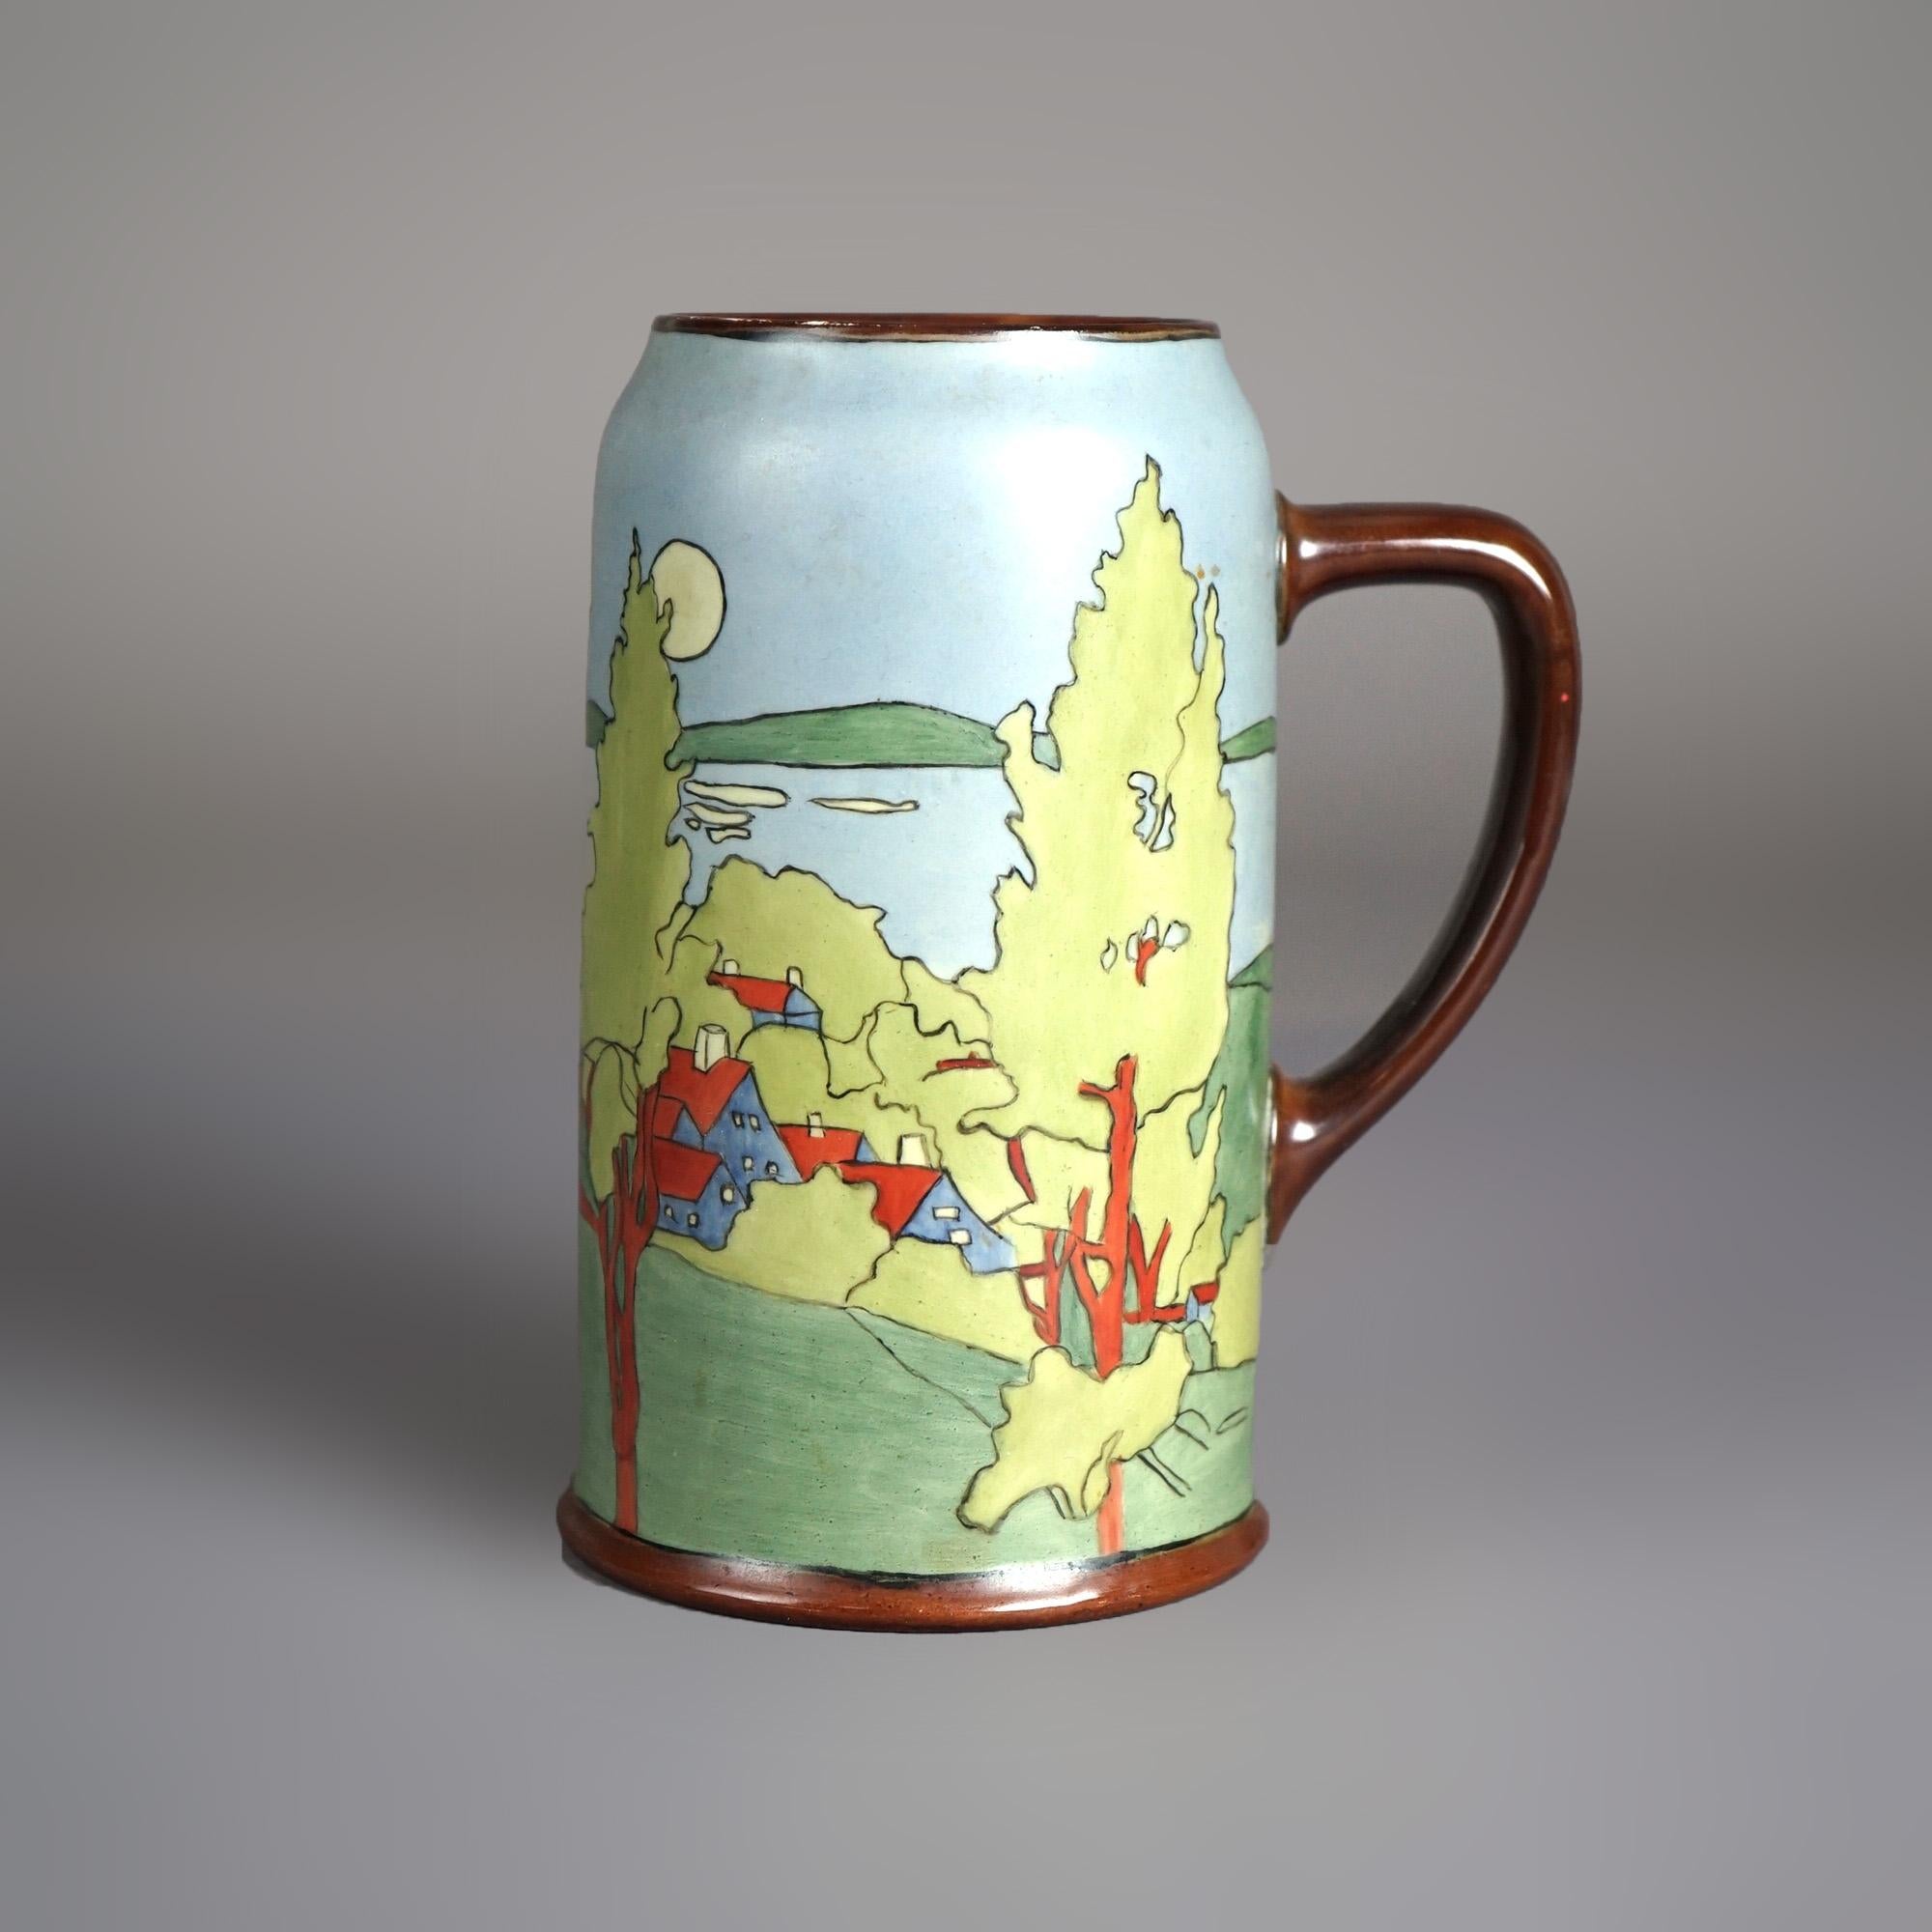 An Arts and Crafts tankard in the manner of Wesley Dow offers porcelain construction with lakeside village scene, c1900

Measures - 7.25